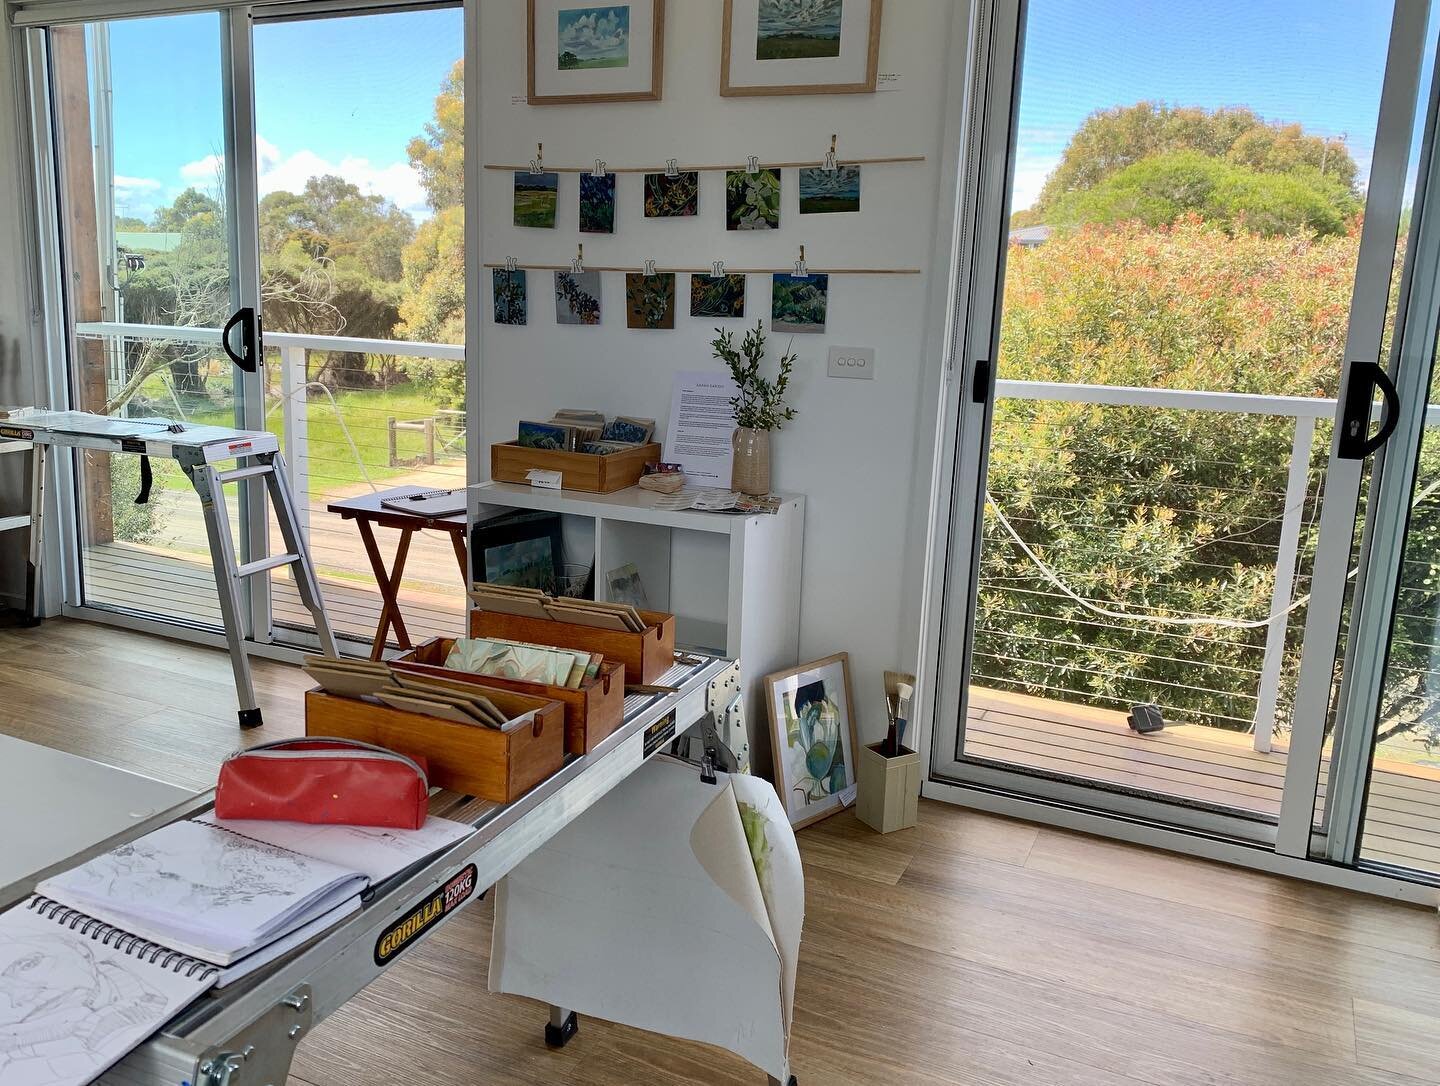 It&rsquo;s so lovely to have visitors at the studio today. Thankyou : )
Studio open today and tomorrow 10am-4pm.
Details can be found here on all the artists and galleries in the art connect south Gippsland art trail&hellip;
 

https://visitsouthgipp